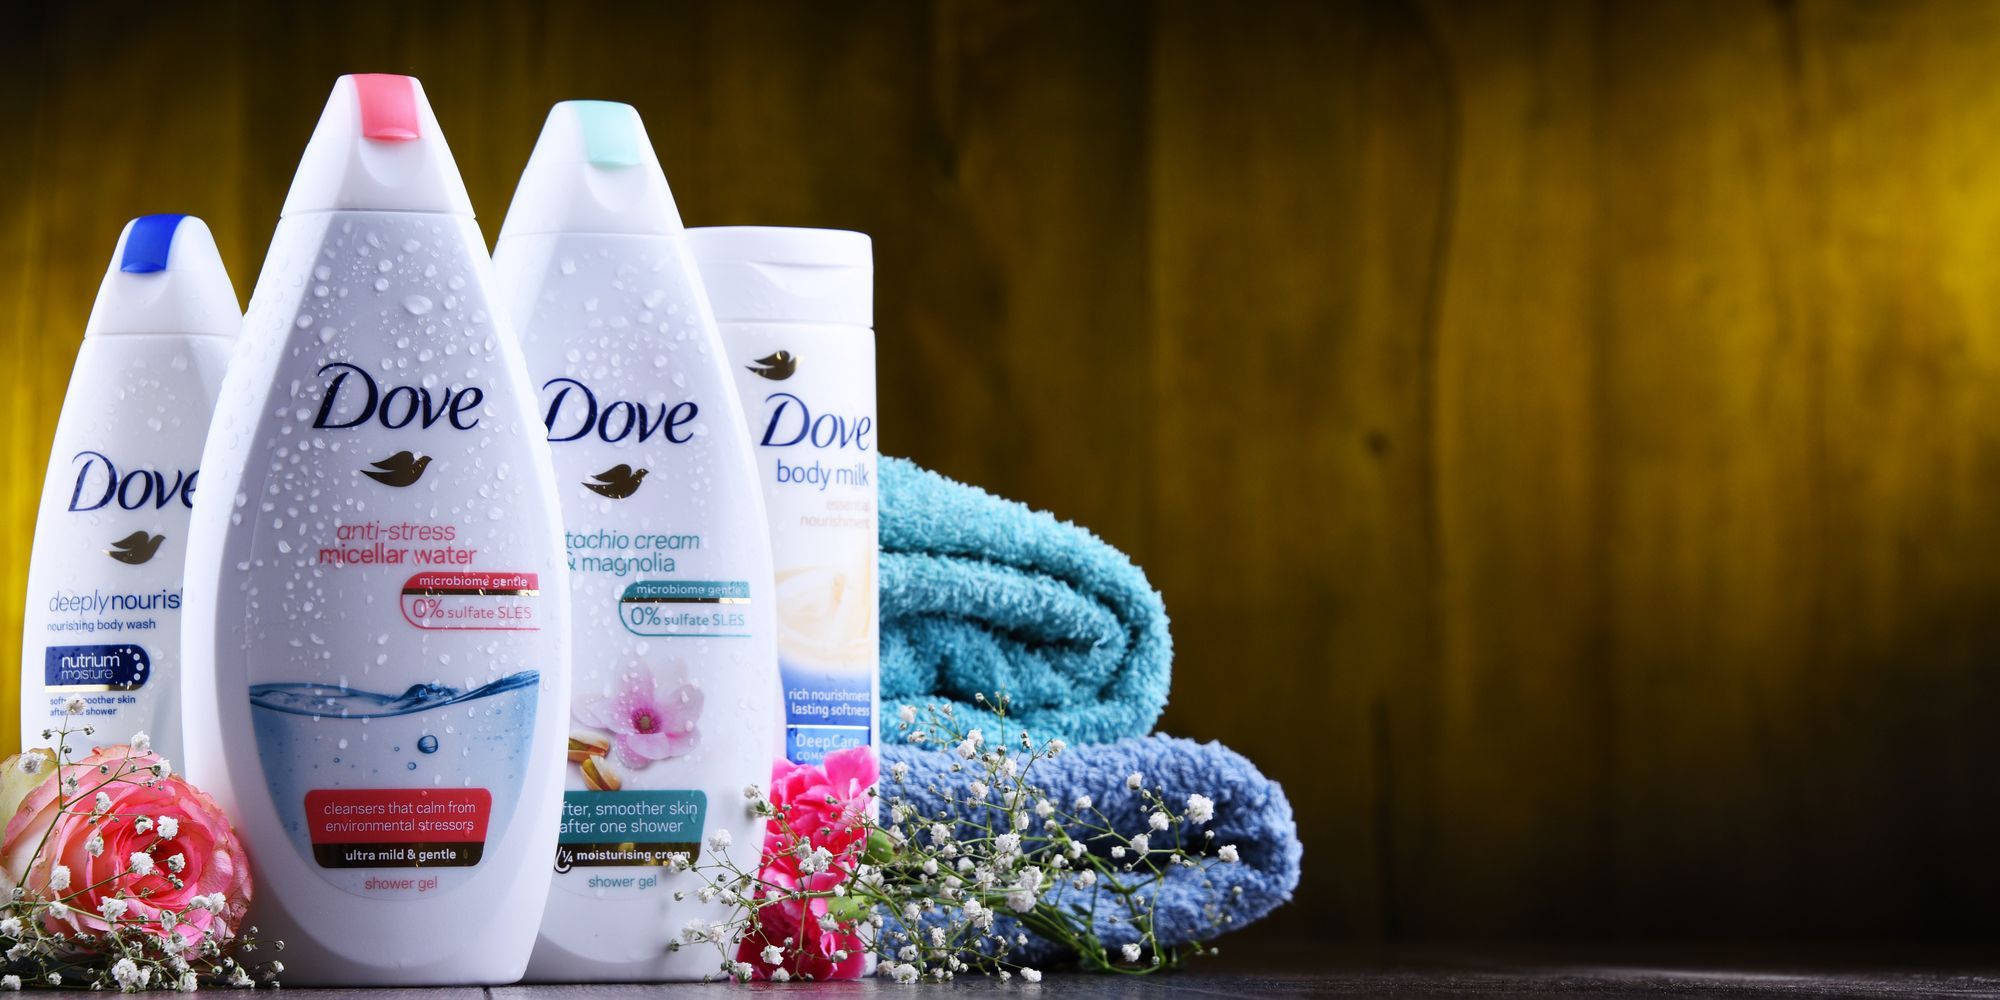 A Dove body wash can trigger skin reactions, a class action lawsuit claims.